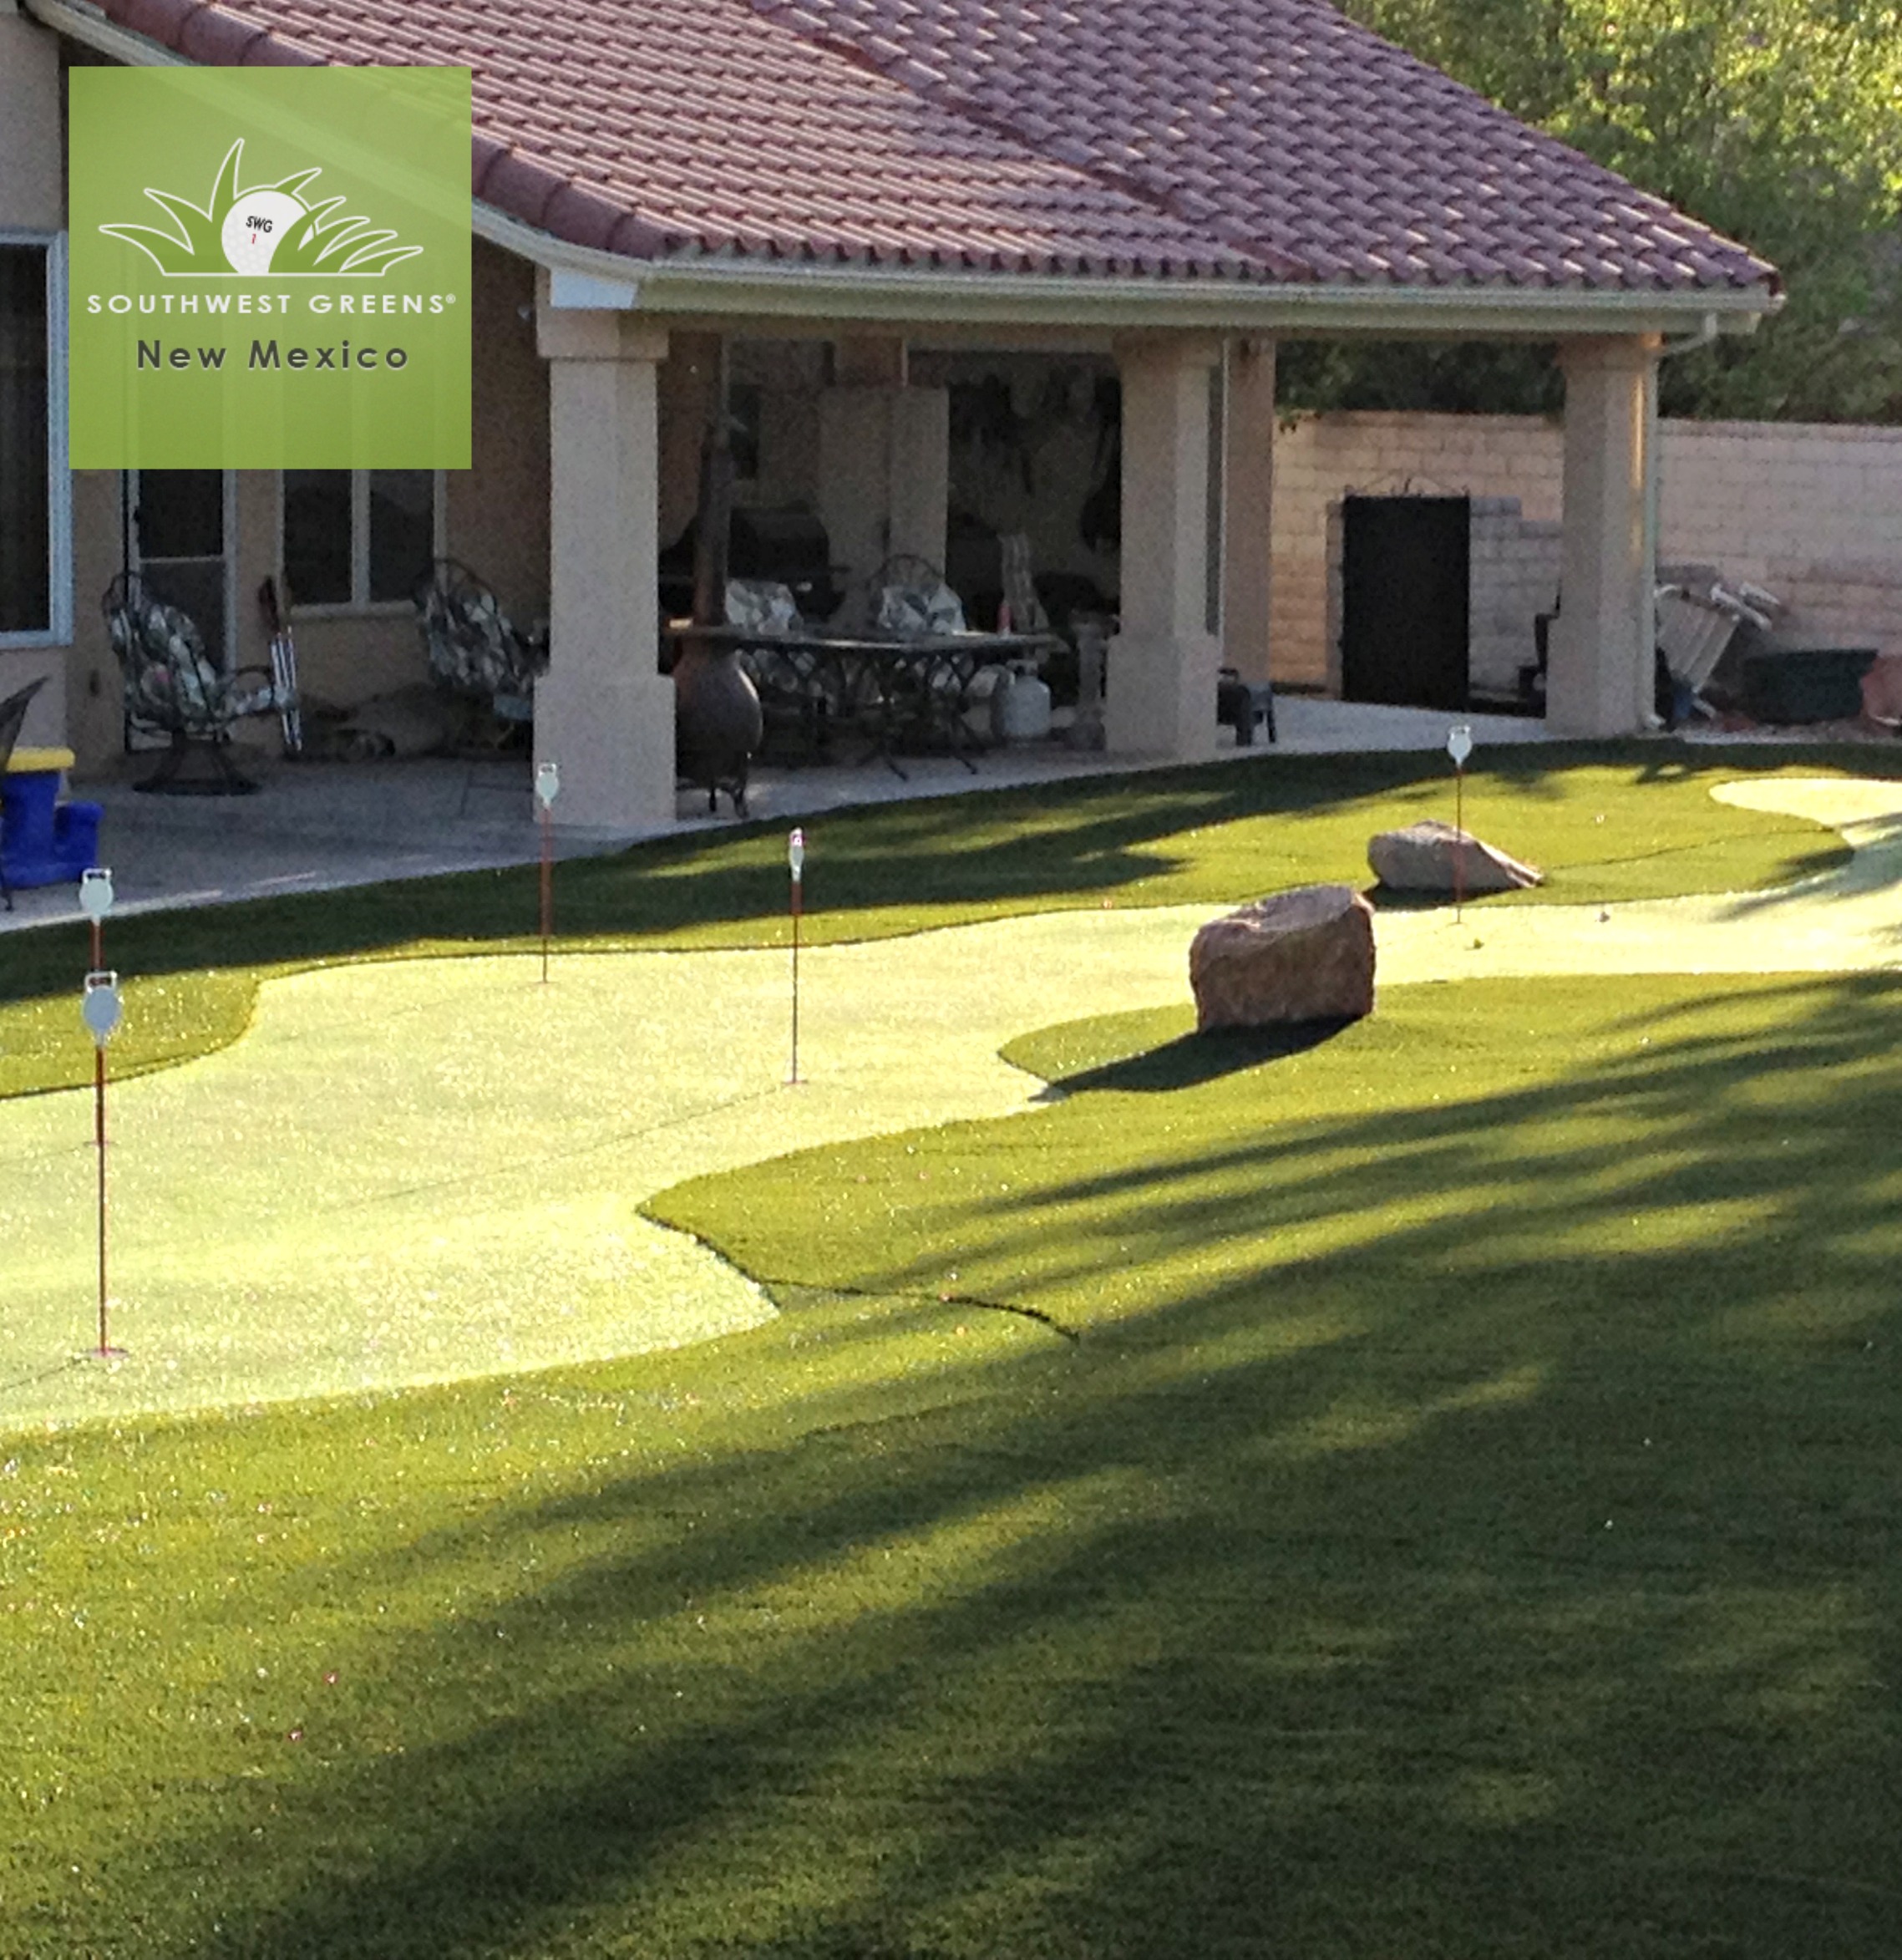 Our artificial grass creates a putting surface that mimics the surface you'd find at your favorite golf course.